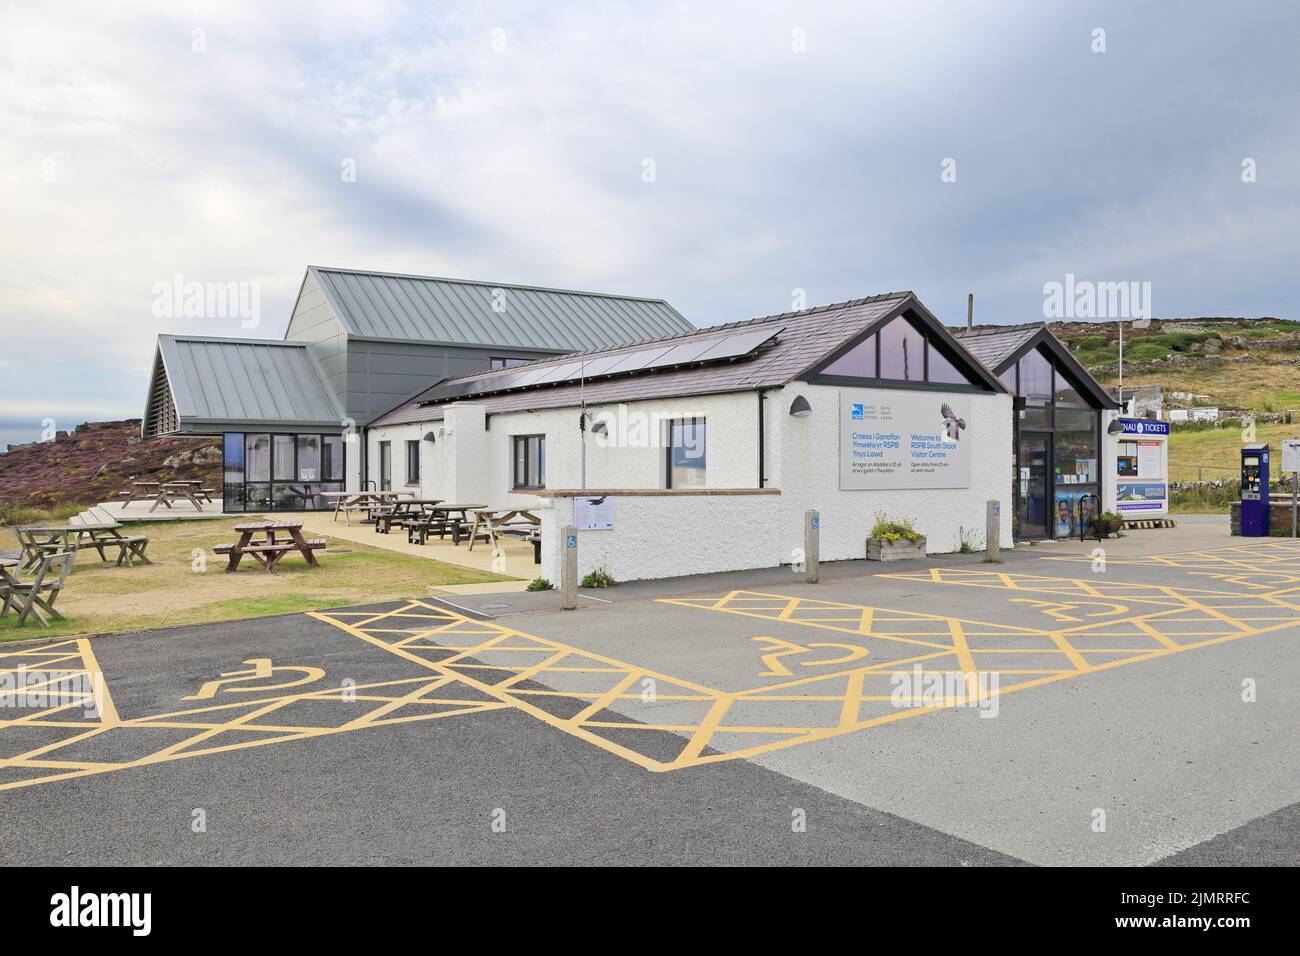 RSPB visitors centre at South Stack, Ynys Lawd, Holyhead, Isle of Anglesey, Ynys Mon, North Wales,UK. Stock Photo